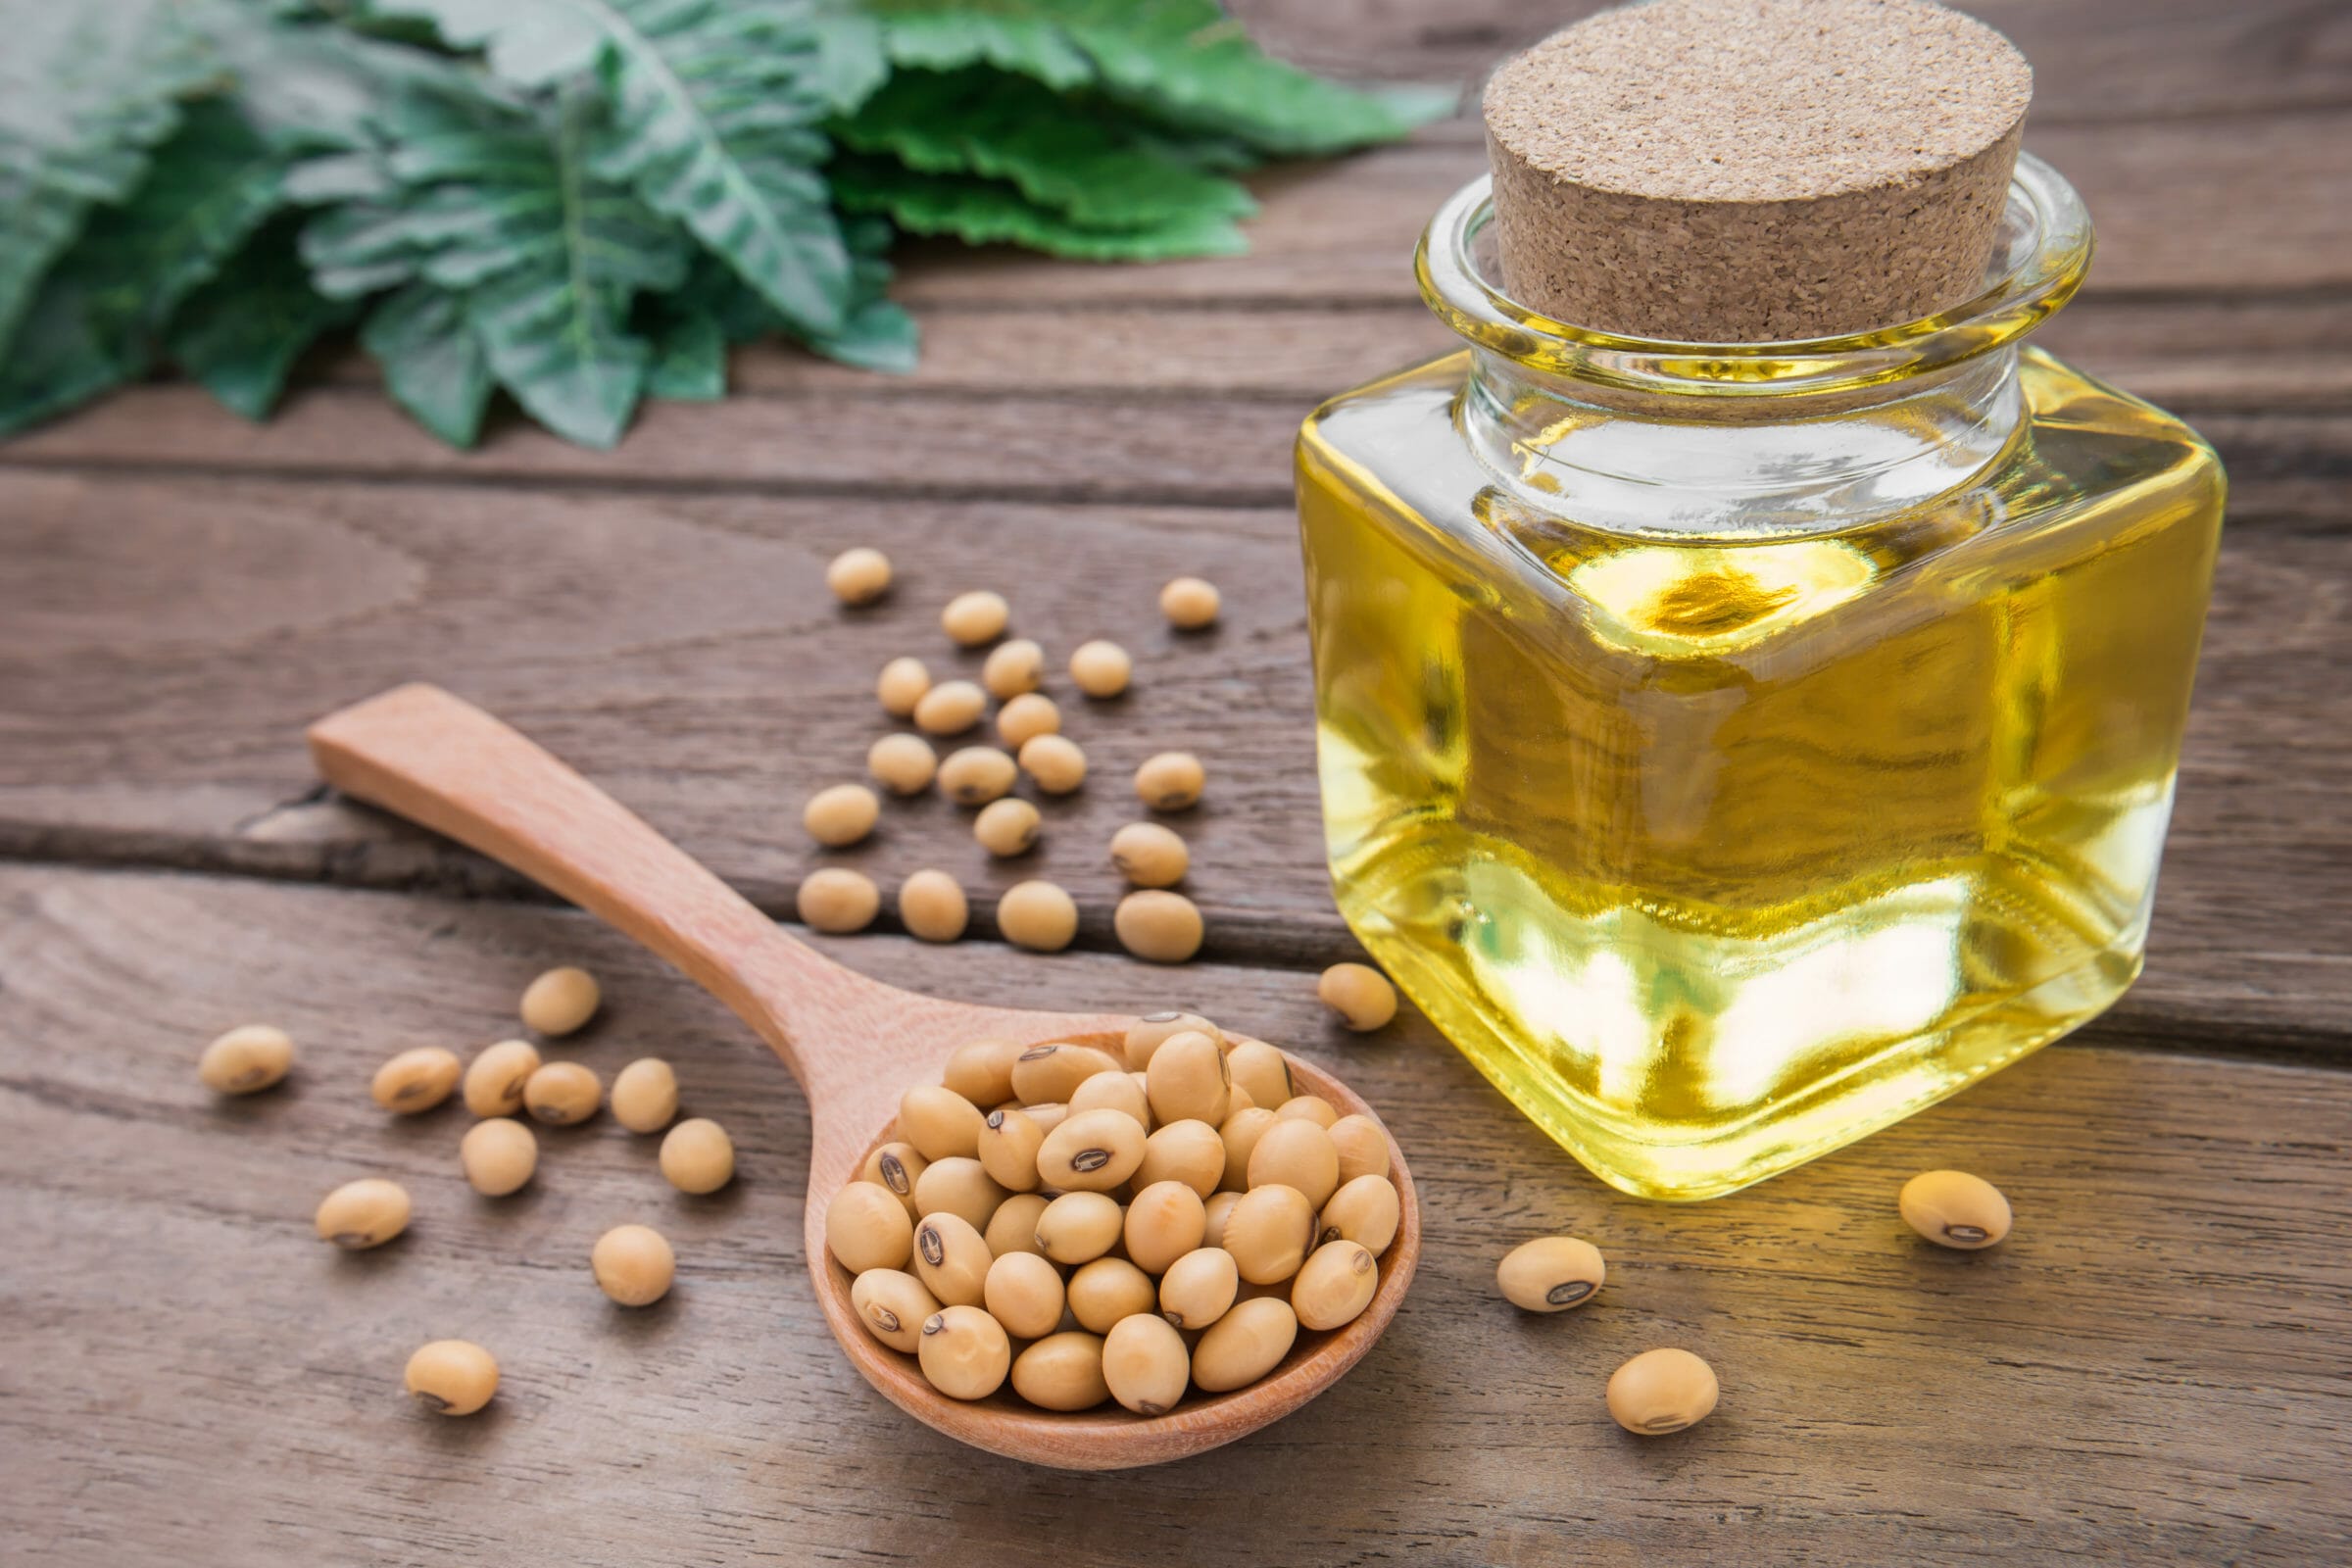 Soybean oil and soybeans are highly inflammatory.